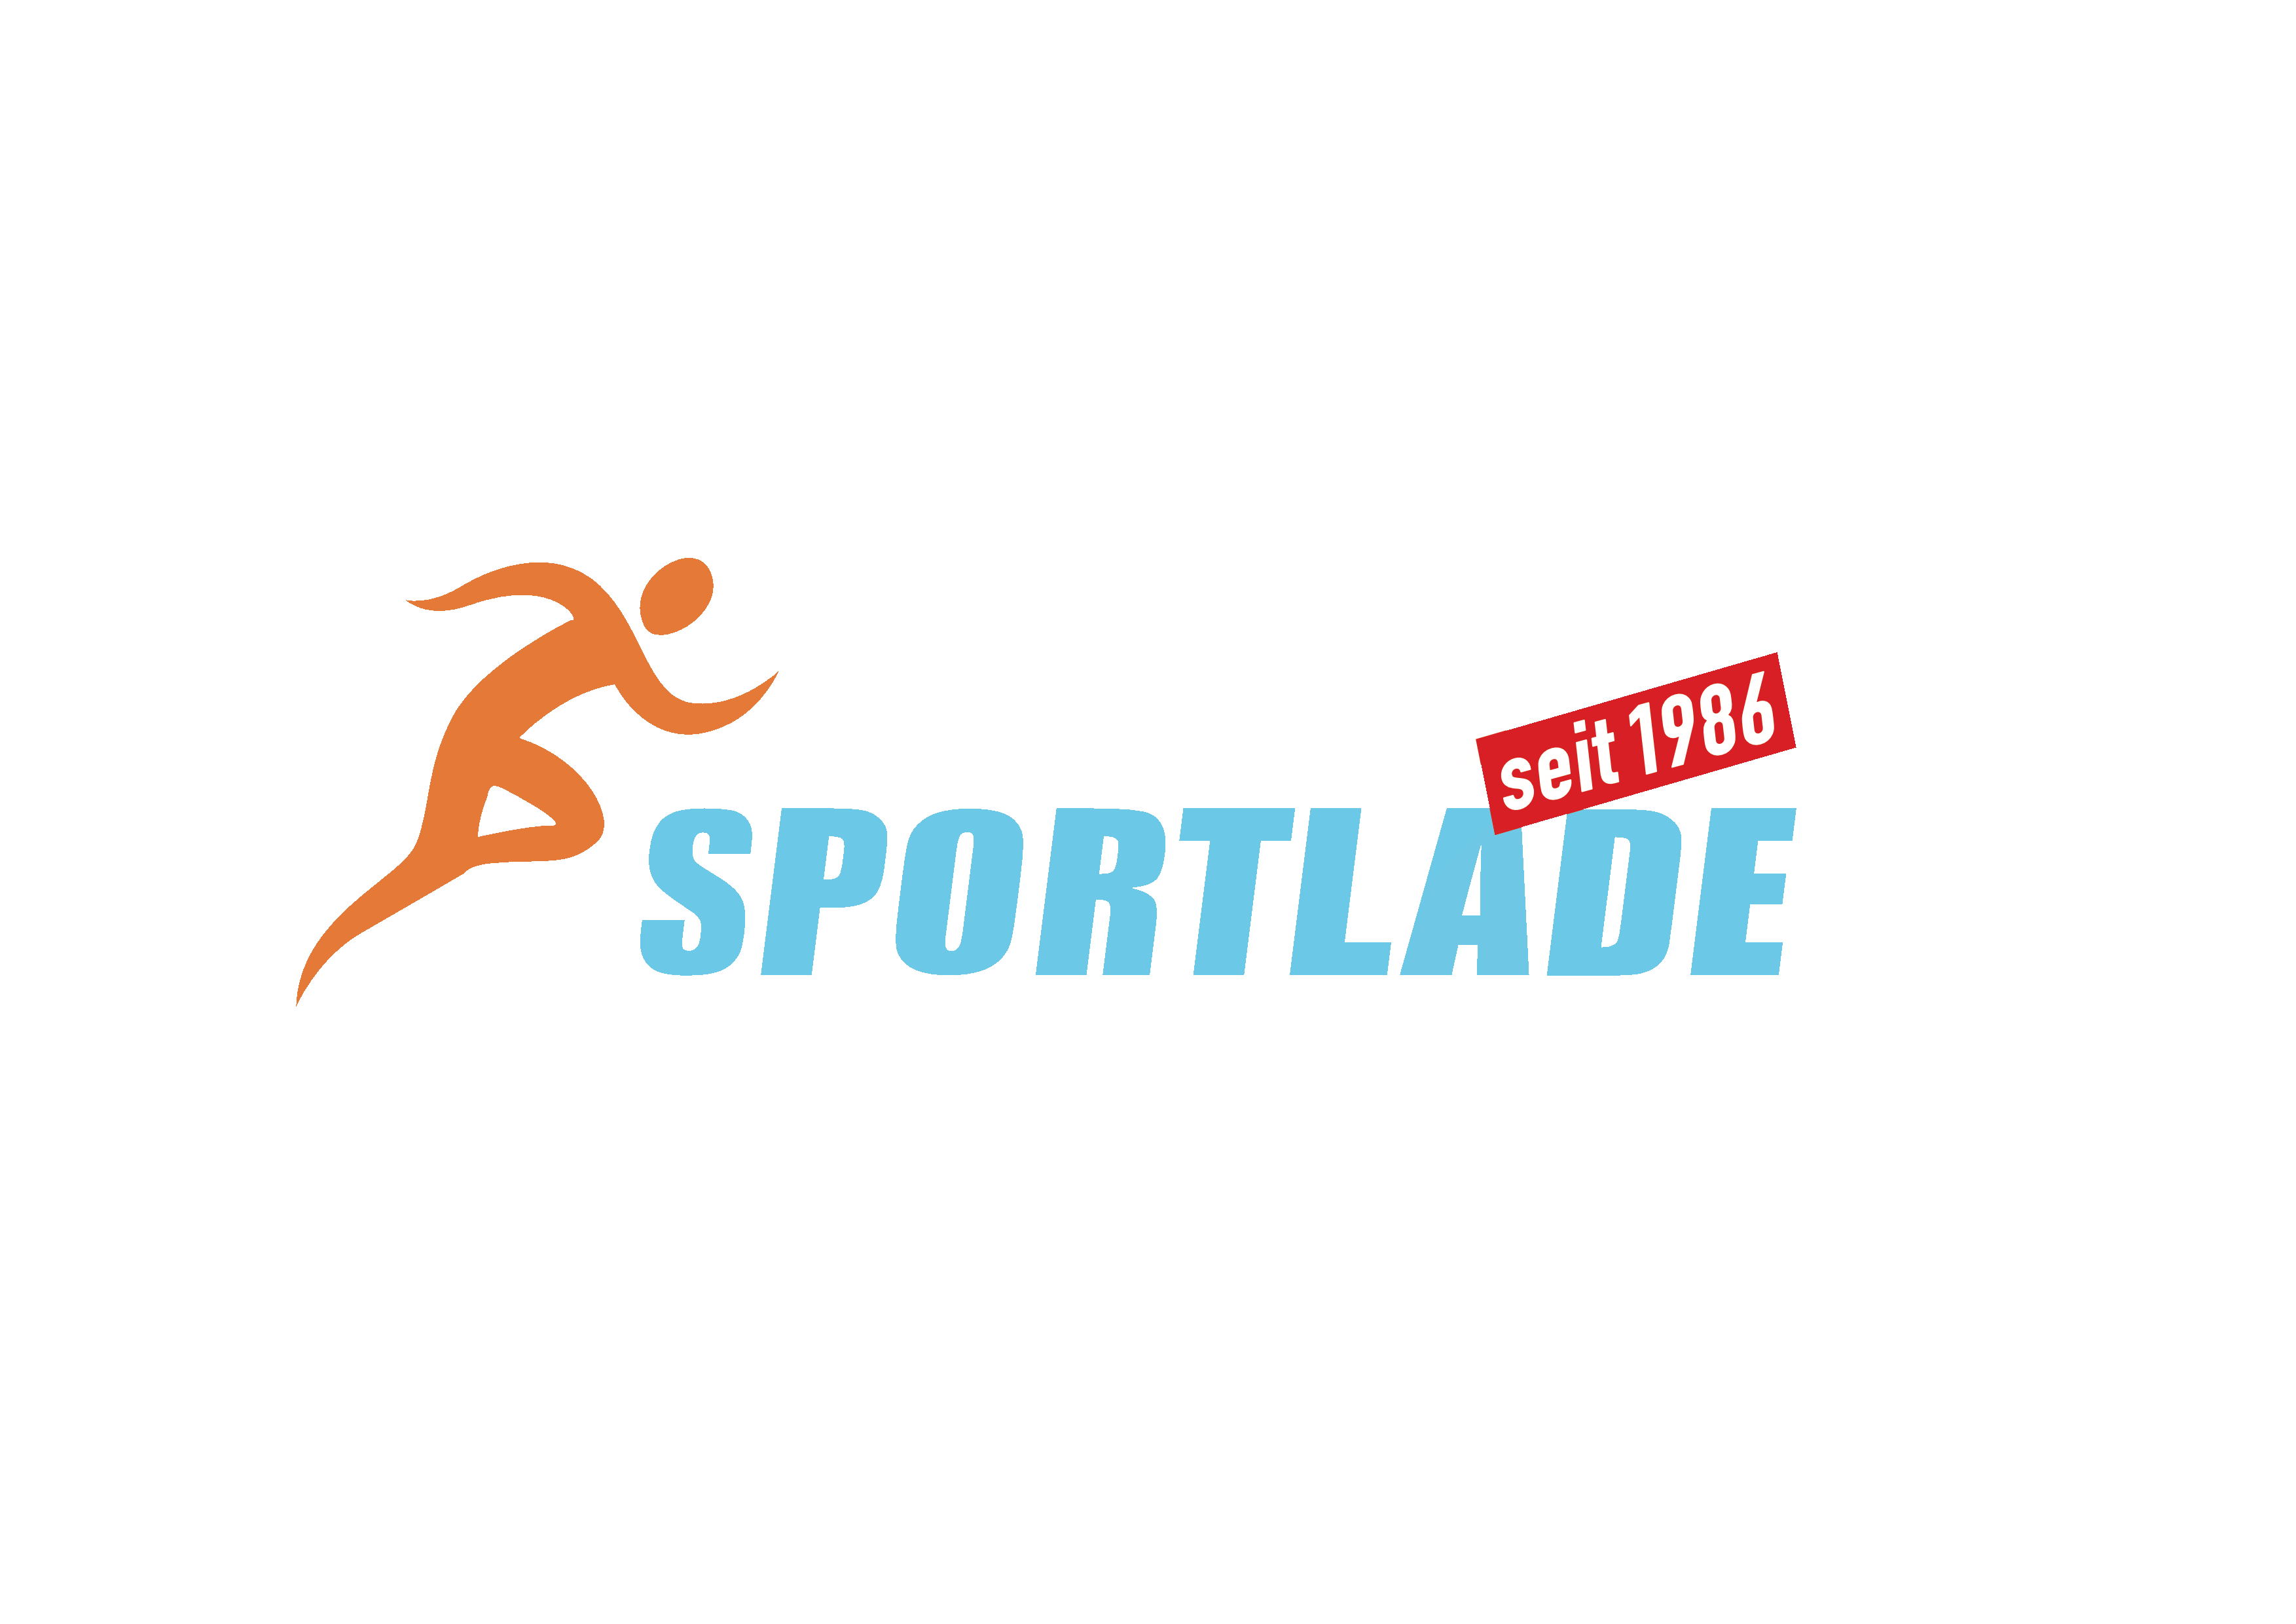 Andy's Sportlade 